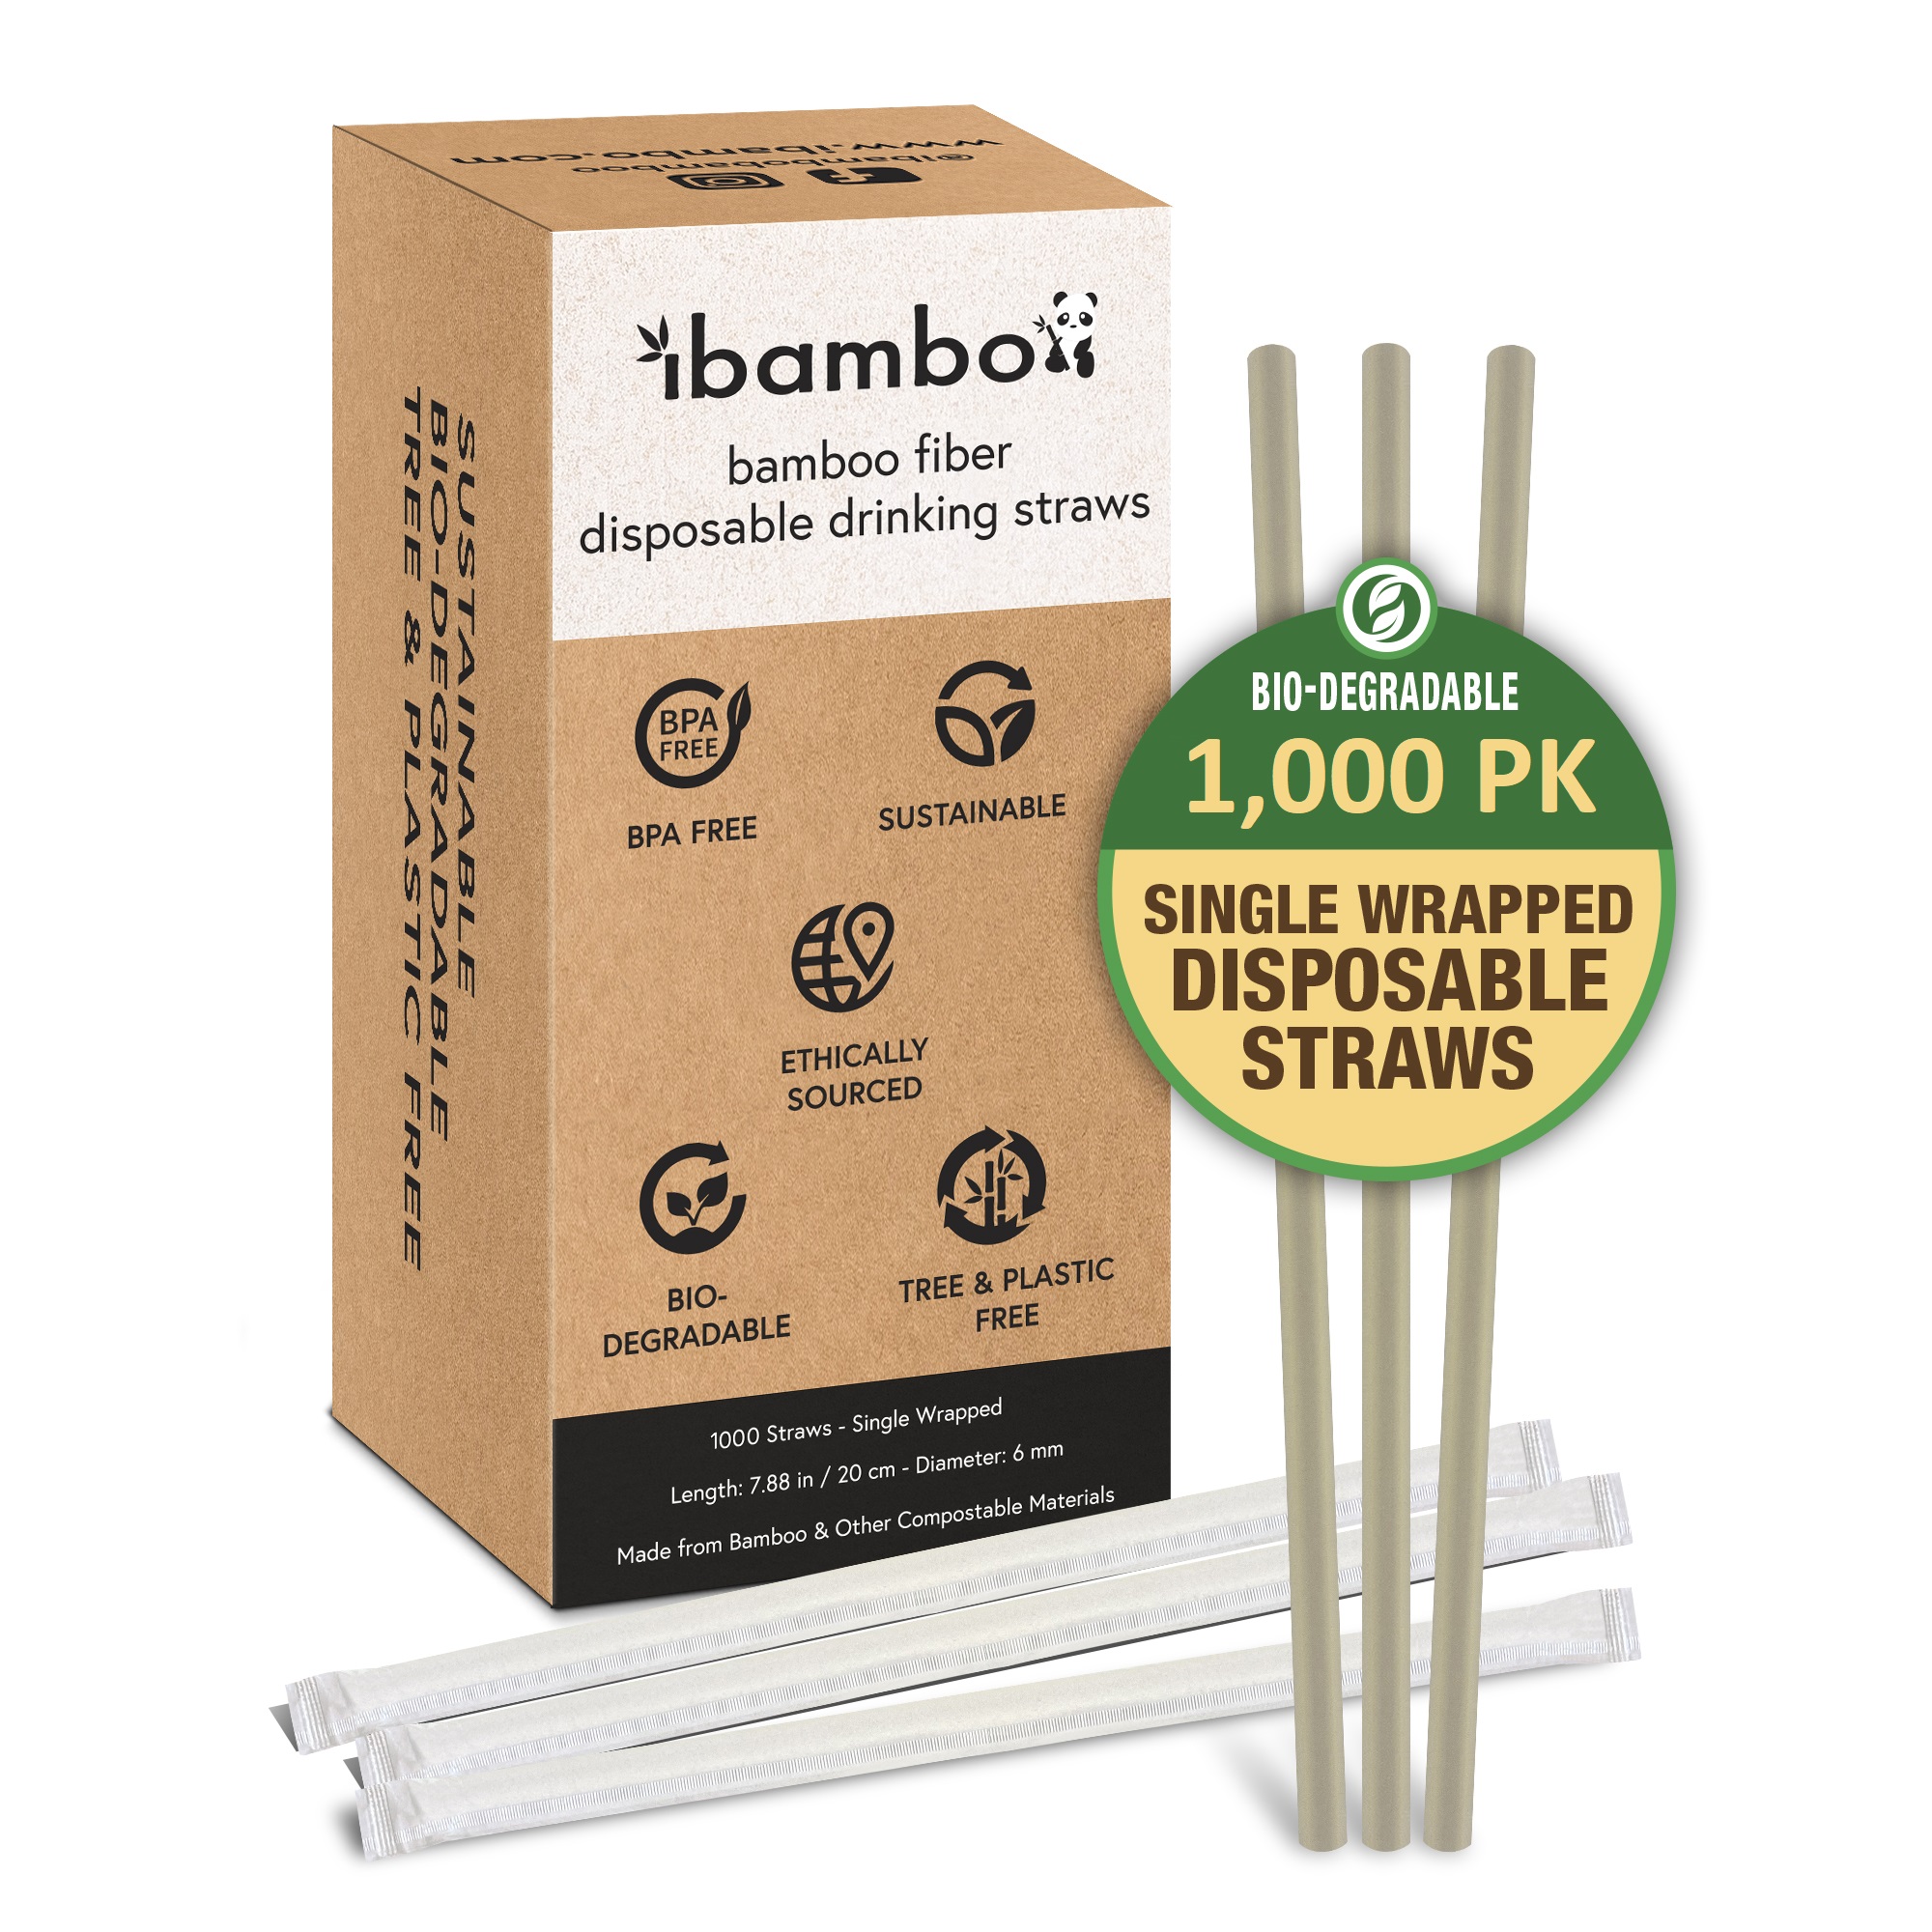 https://ibambo.com/wp-content/uploads/2022/04/1000-Disposable-Indiv-Wrap-Bamboo-Straws-Package-Straws.jpg